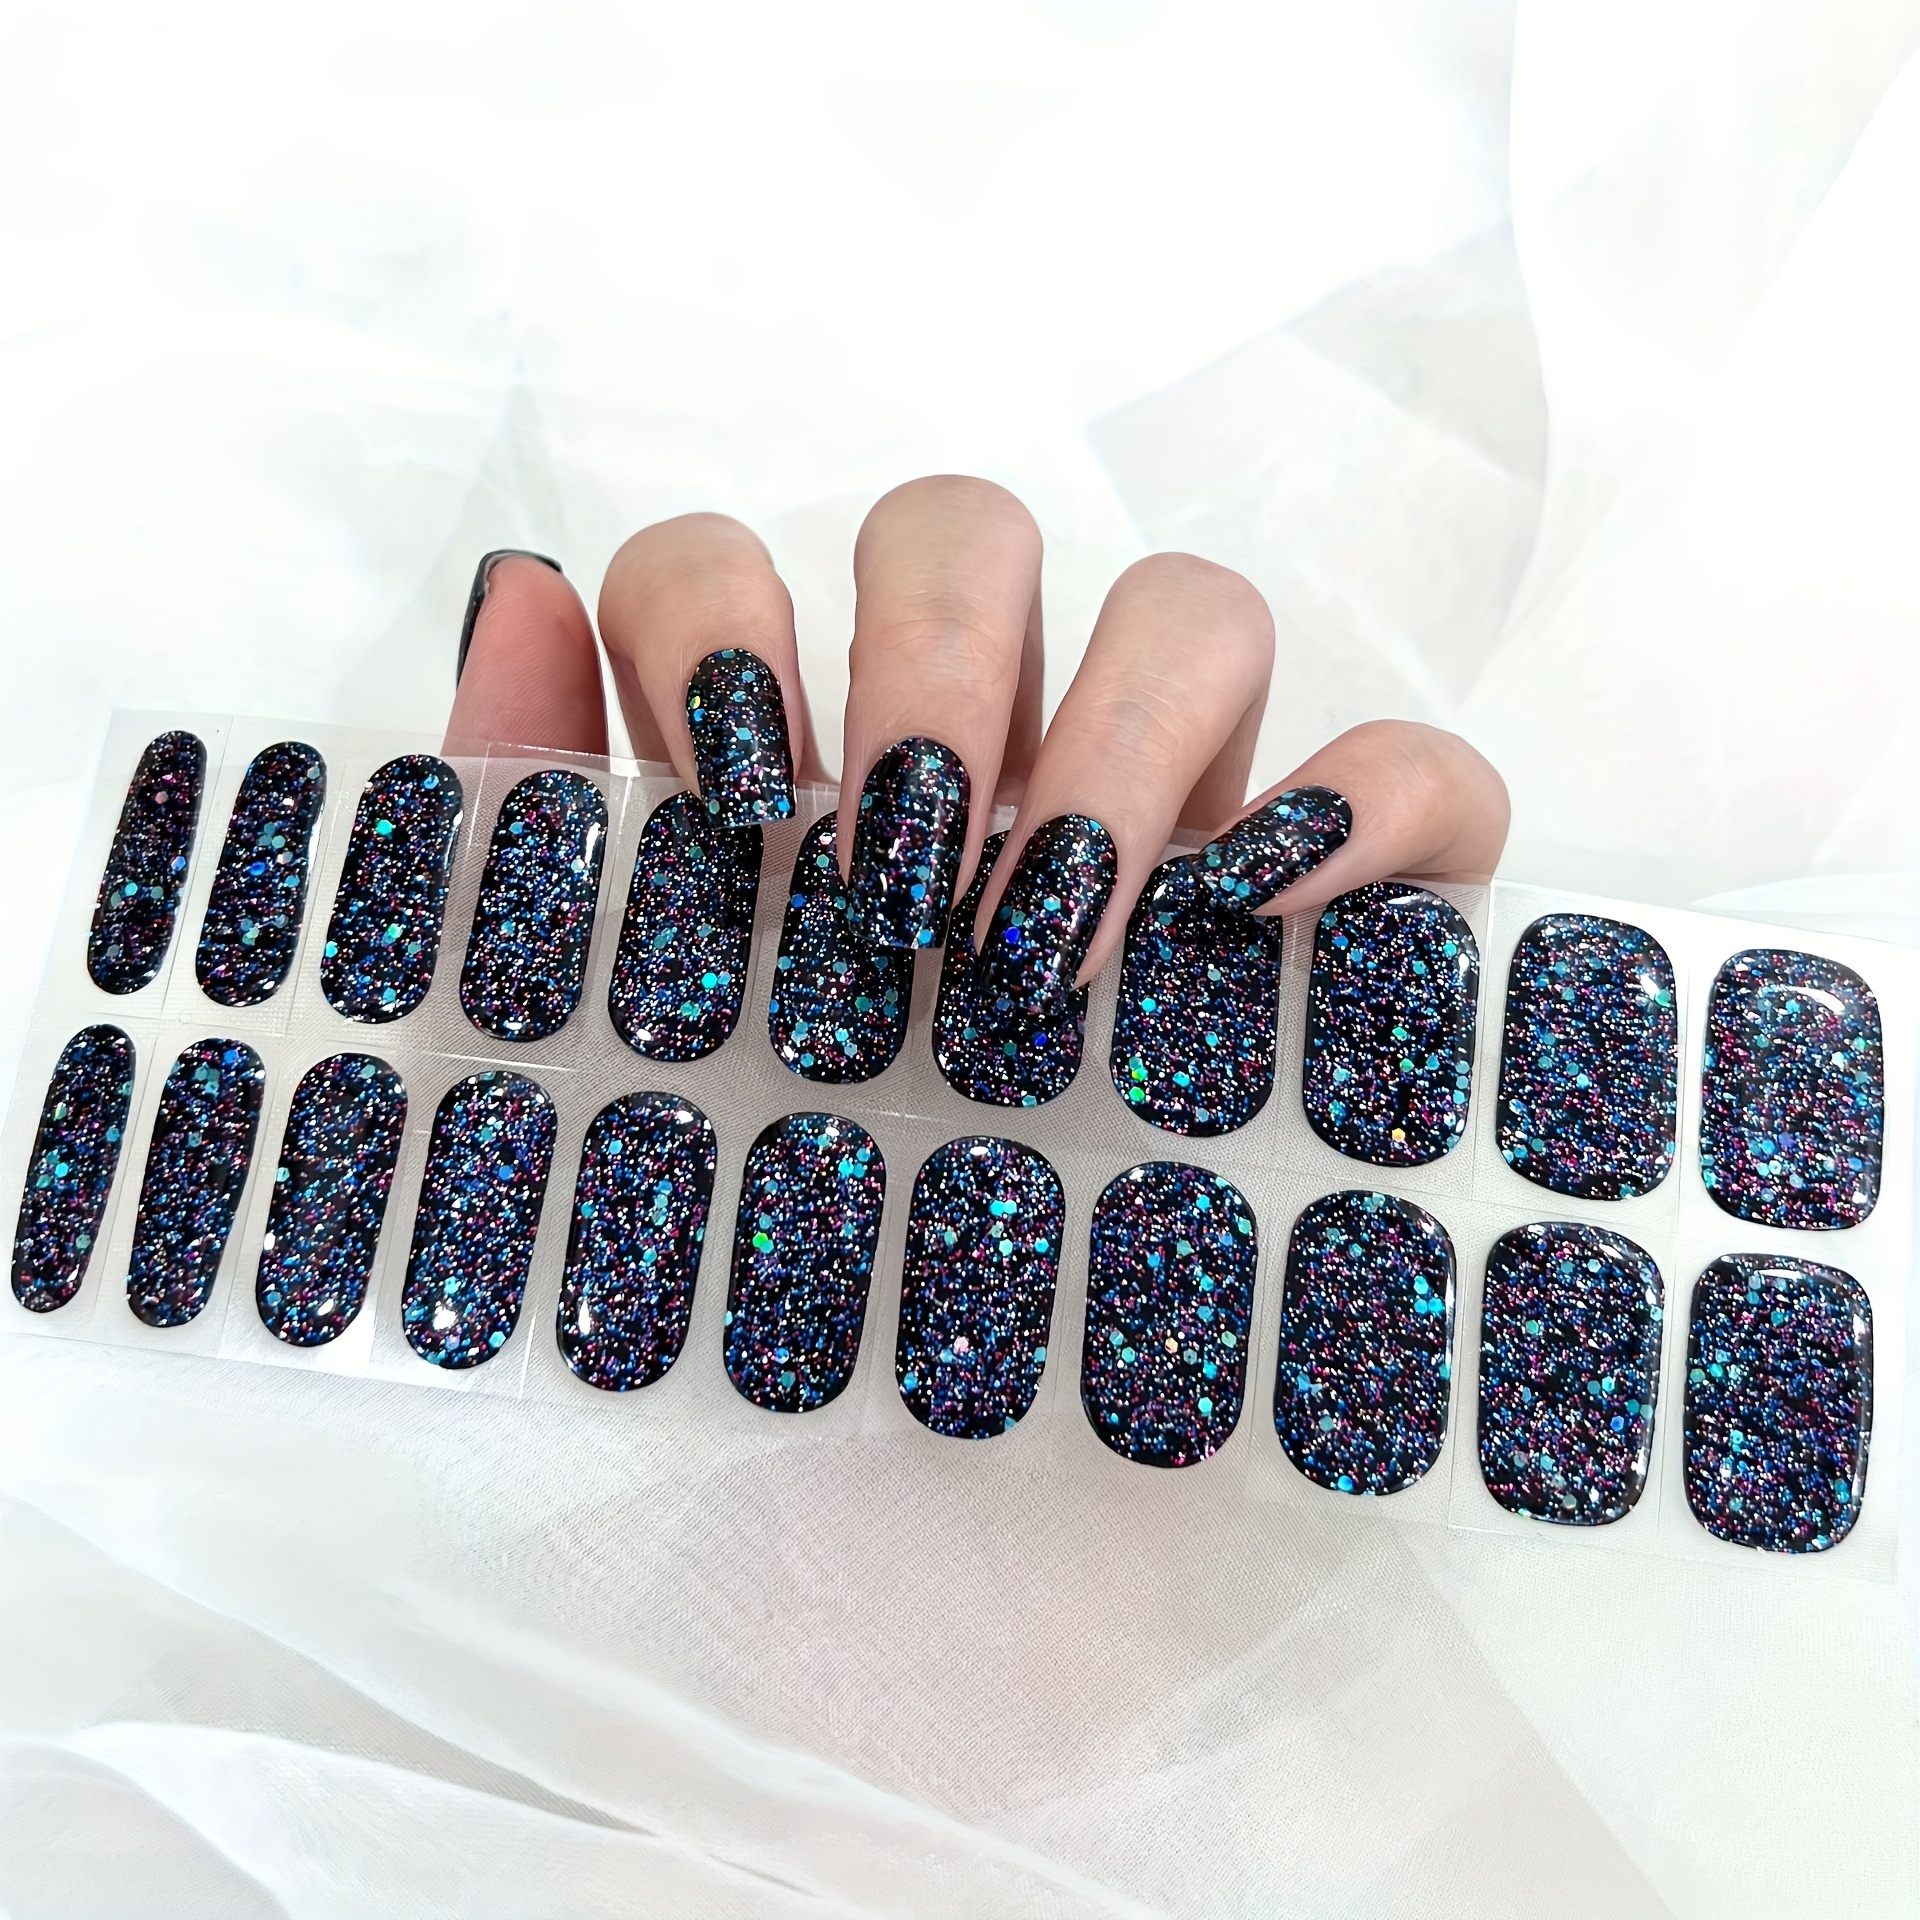 

Semi Cured Gel Nail Wraps, Glitter Semi-cured Gel Nail Strips-works With Any Nail Lamps, Salon-quality, Long Lasting, Easy To Apply & Remove